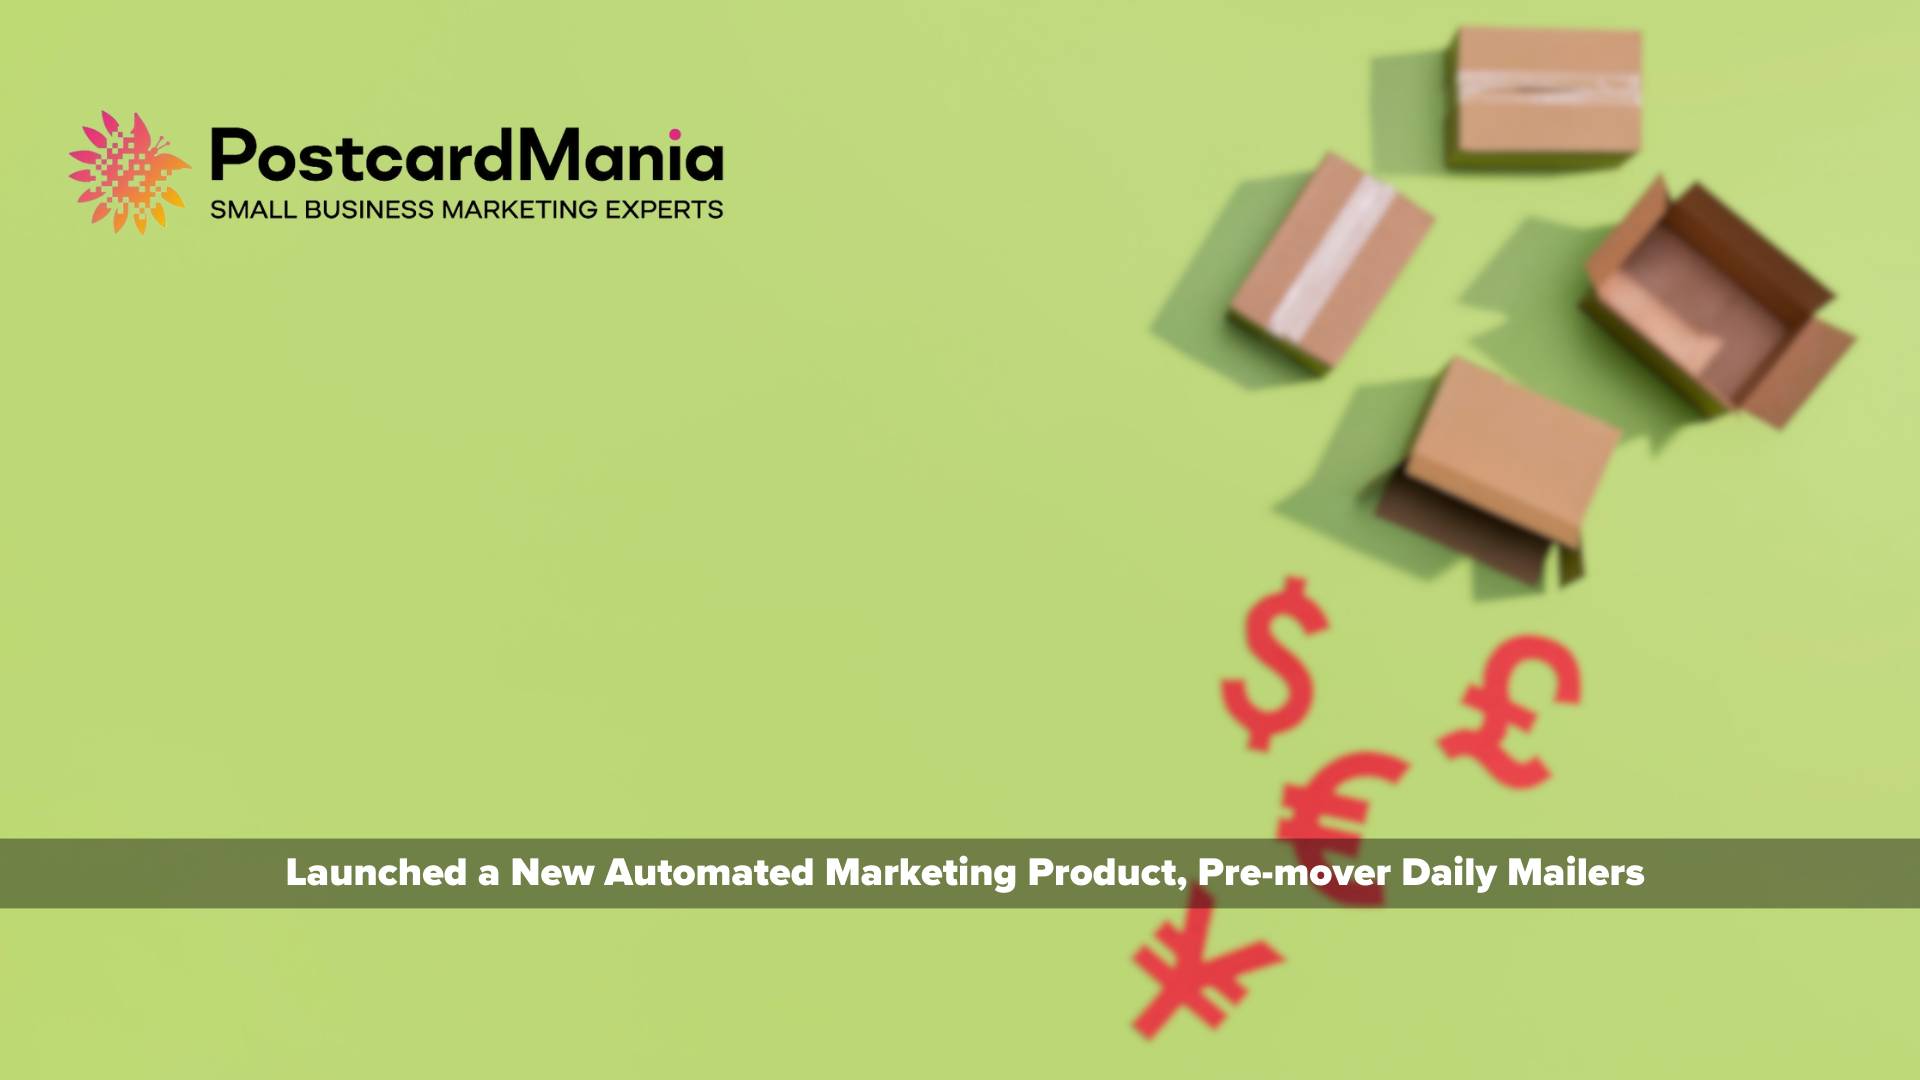 PostcardMania Debuts New Direct Mail Automation Product Featuring Daily Pre-Mover Data